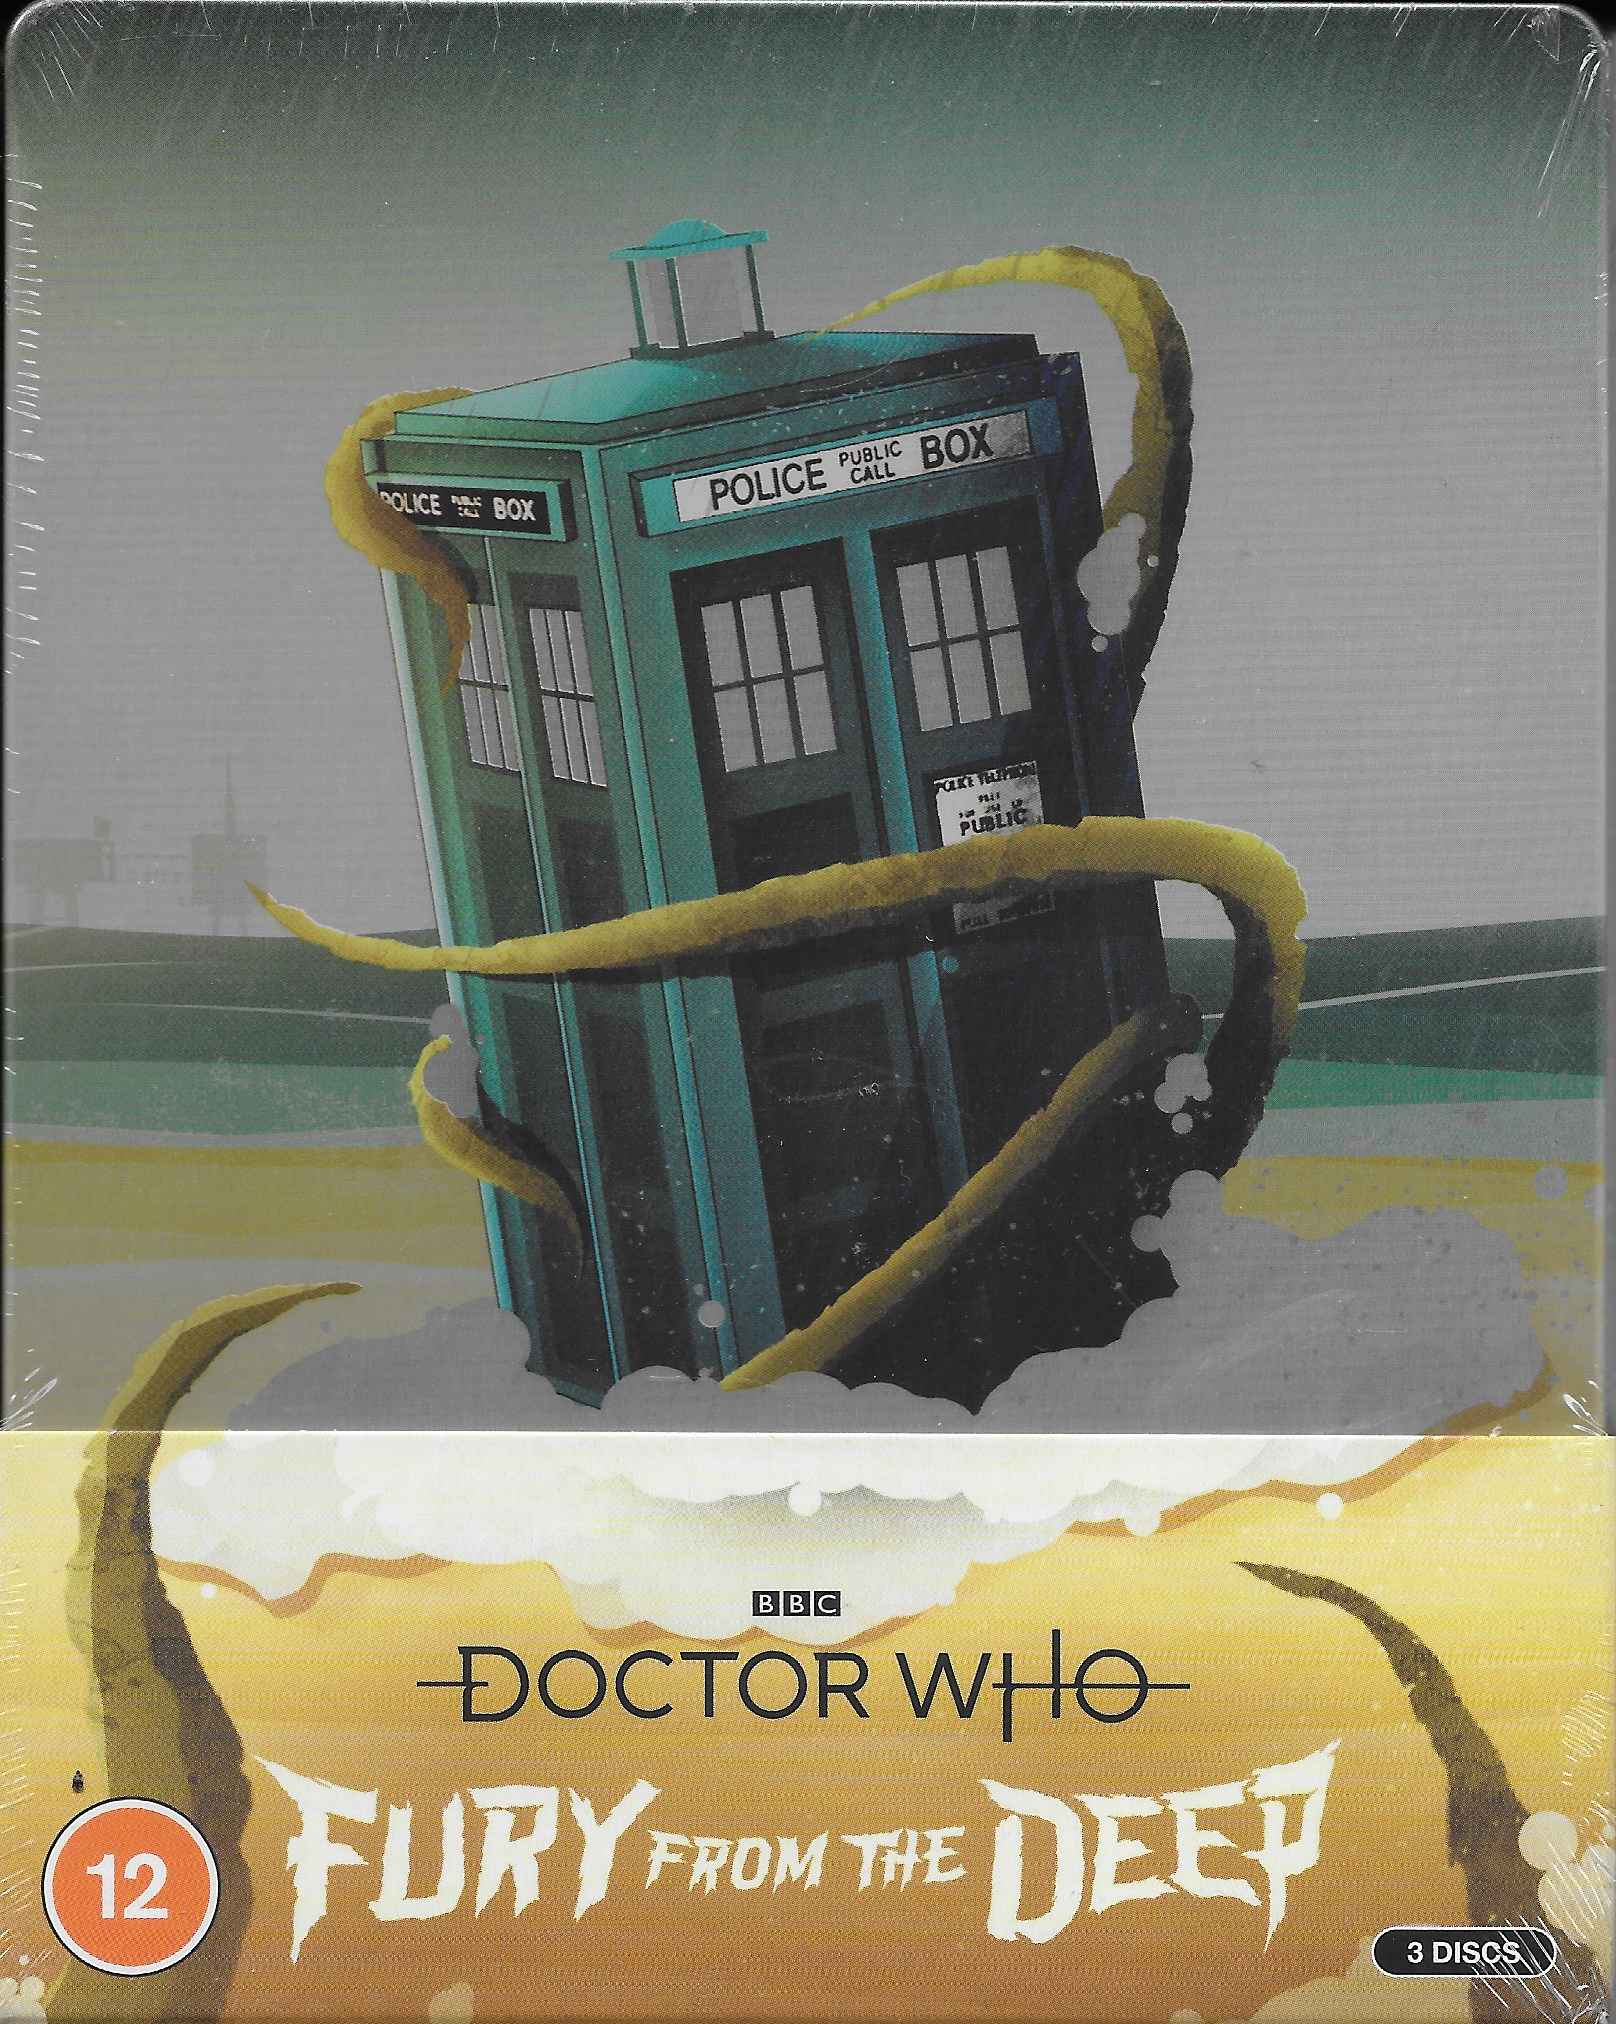 Picture of BBCBD 0500 Doctor Who - Fury from the deep (Limited Amazon steelbook edition) by artist Victor Pemberton from the BBC blu-rays - Records and Tapes library